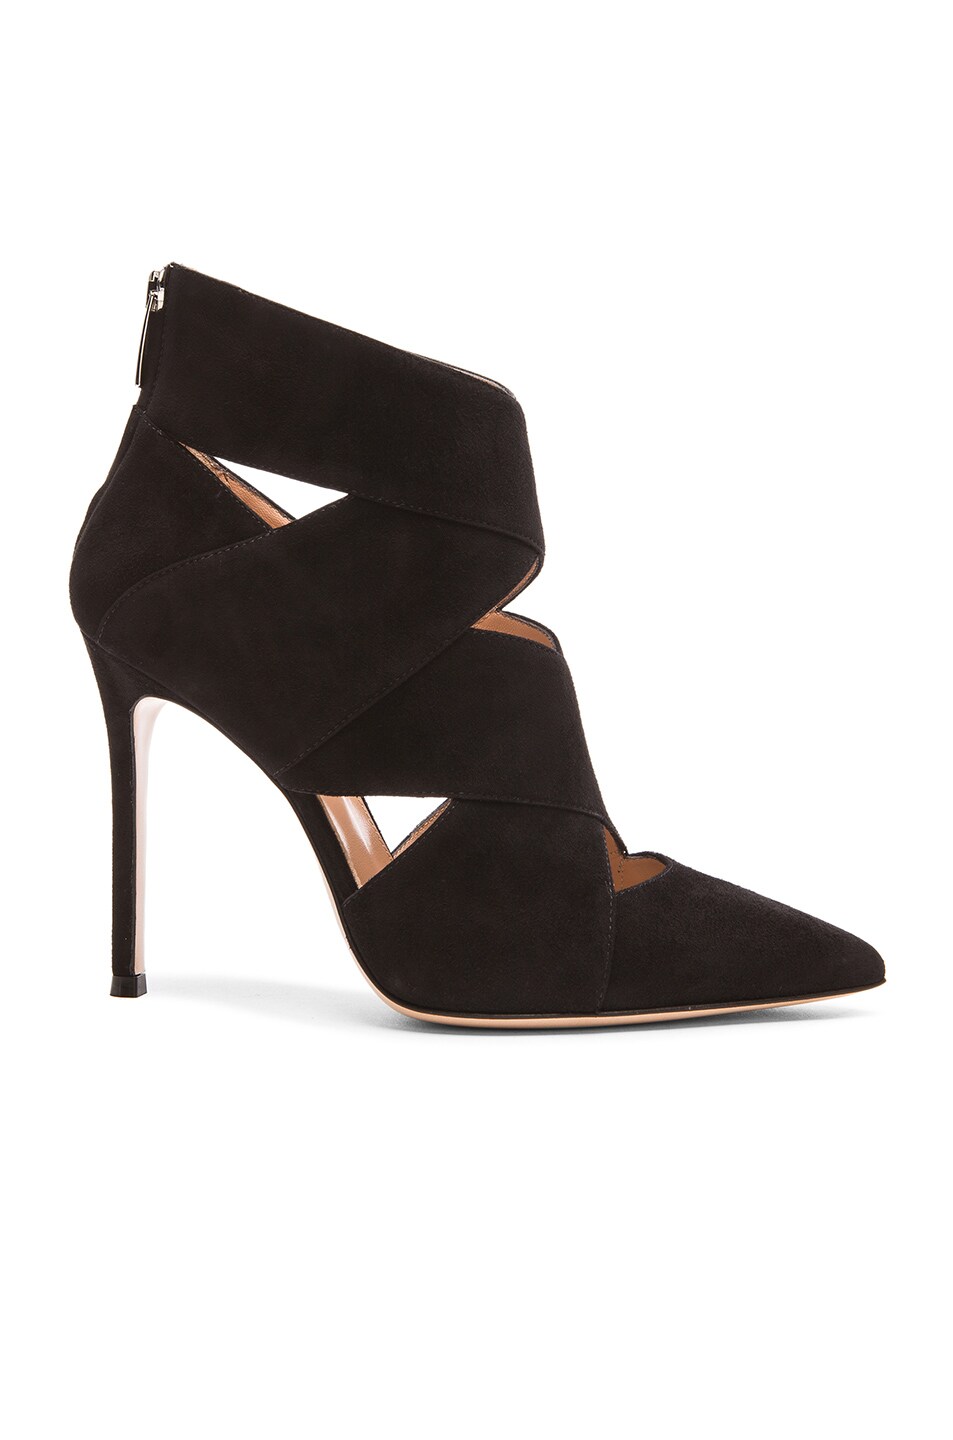 Image 1 of Gianvito Rossi Leather Bandage Heels in Black